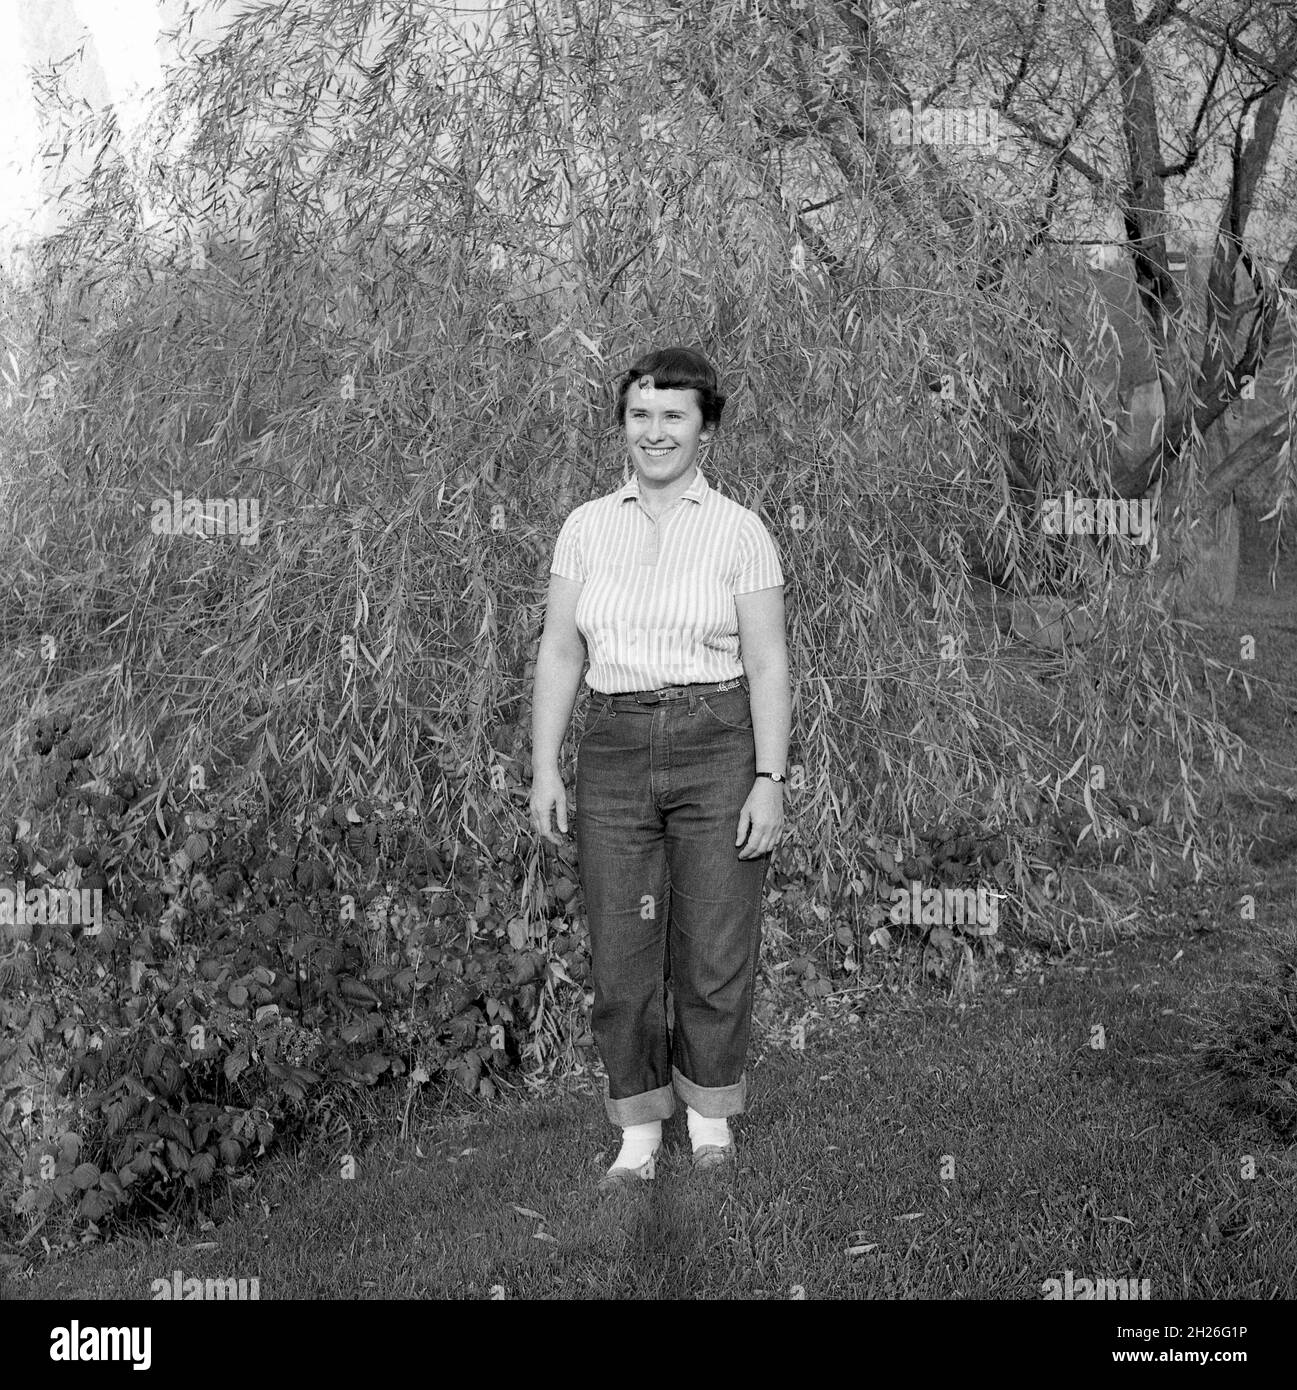 1960s, historical, a young woman standing in a field wearing a short-sleeve top and turn-up bottom demin jeans. These became fashionable and the cool look in the late 1950s, early 60s when rockabilly became popular. Before then, dresses and skirts were the norm for women of all ages and not pants or trousers and demin had only really been worn for manual work. Stock Photo